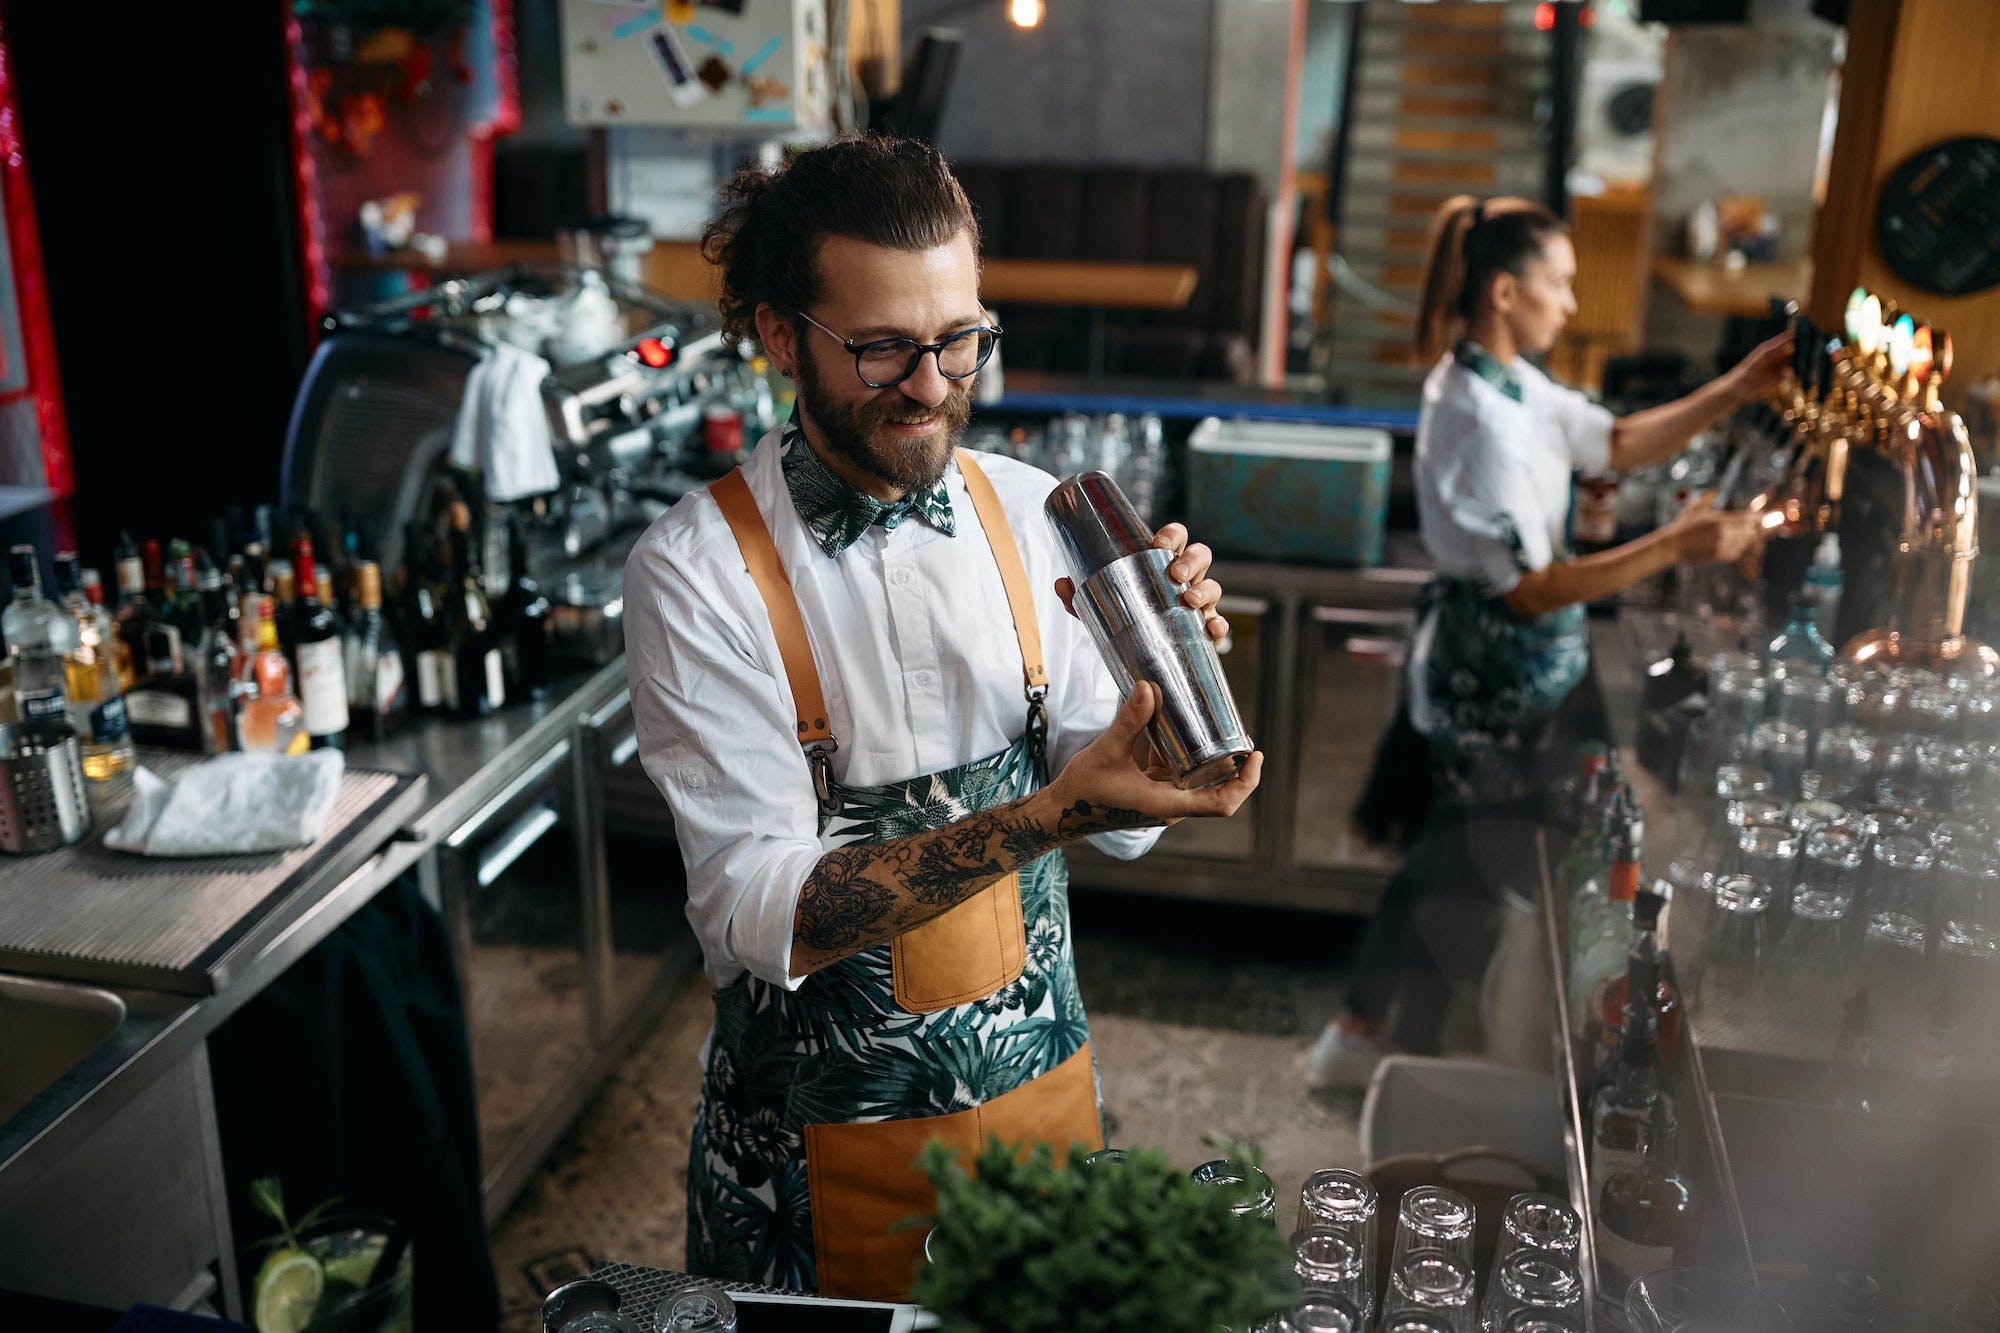 ERP standards: What are the requirements for a bar/café/restaurant?